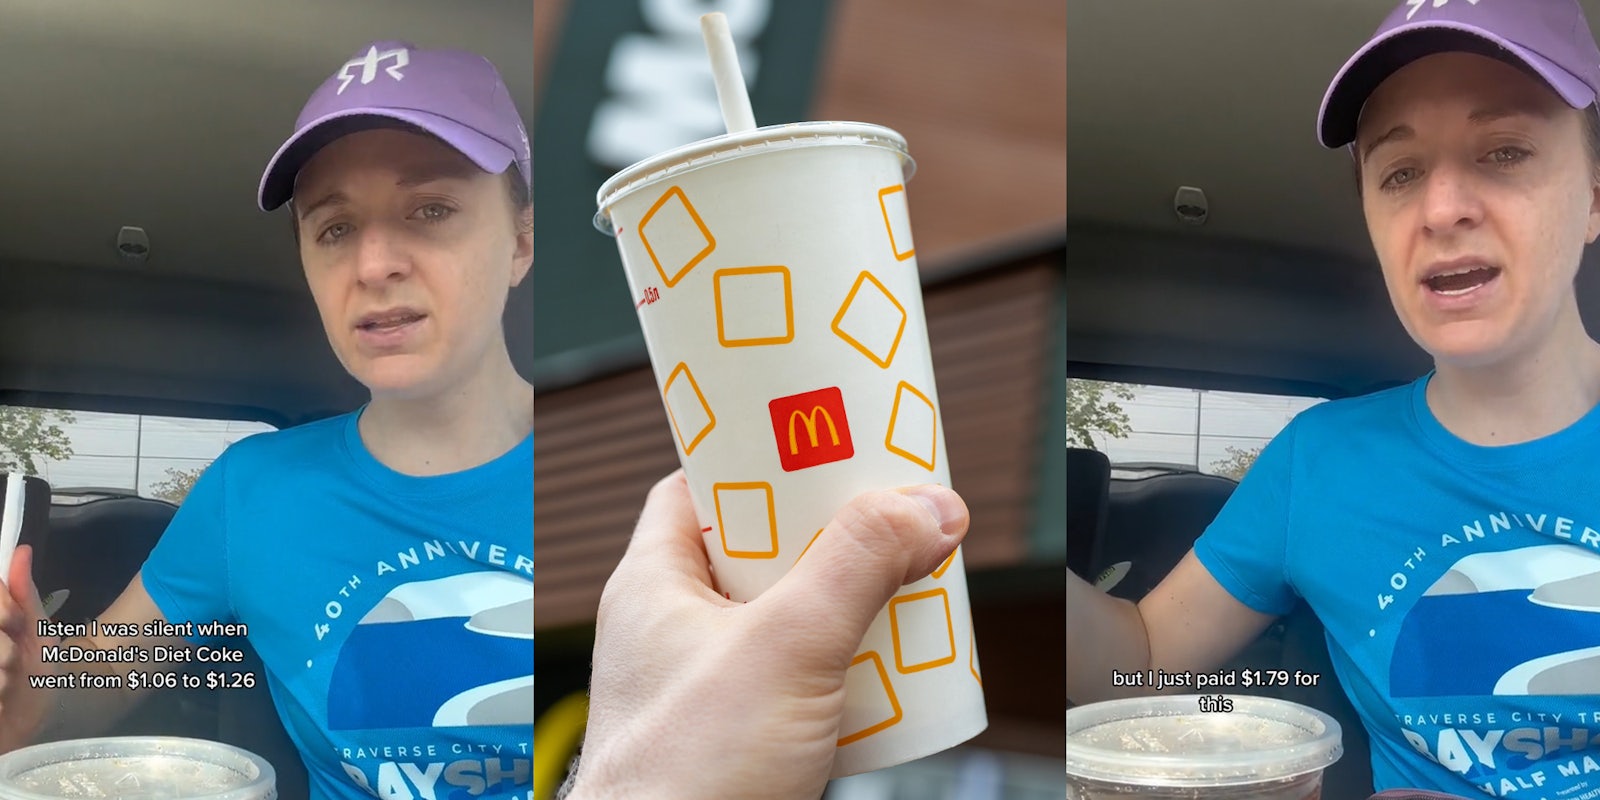 McDonald's customer speaking in car with caption 'listen I was silent when McDonald's Diet Coke went from $1.06 to $1.26' (l) McDonald's drink in hand in (c) McDonald's customer speaking in car with caption 'but I just paid $1.79 for this' (r)